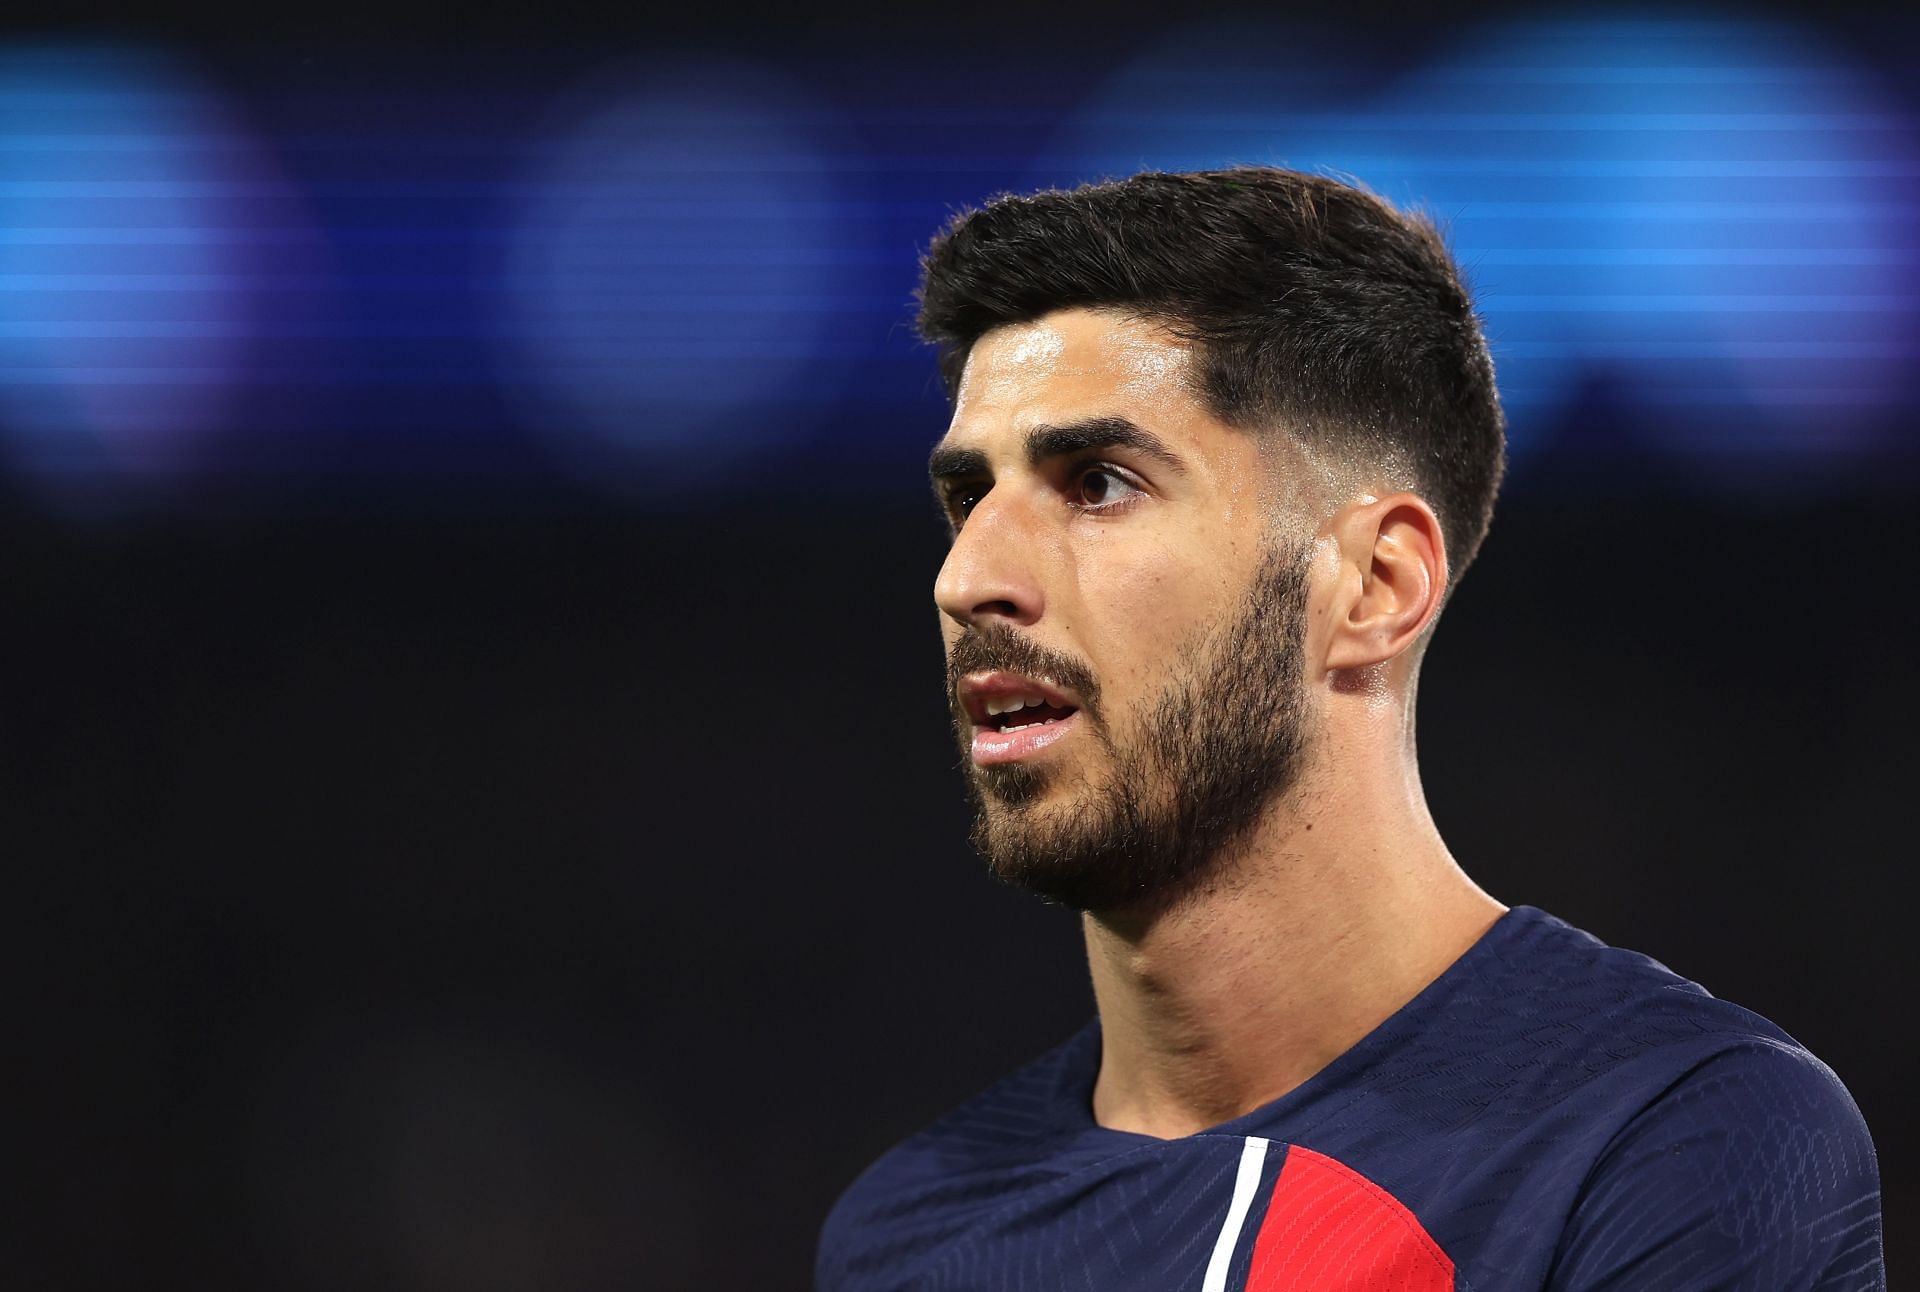 Marco Asensio remains unsettled at the Parc des Princes